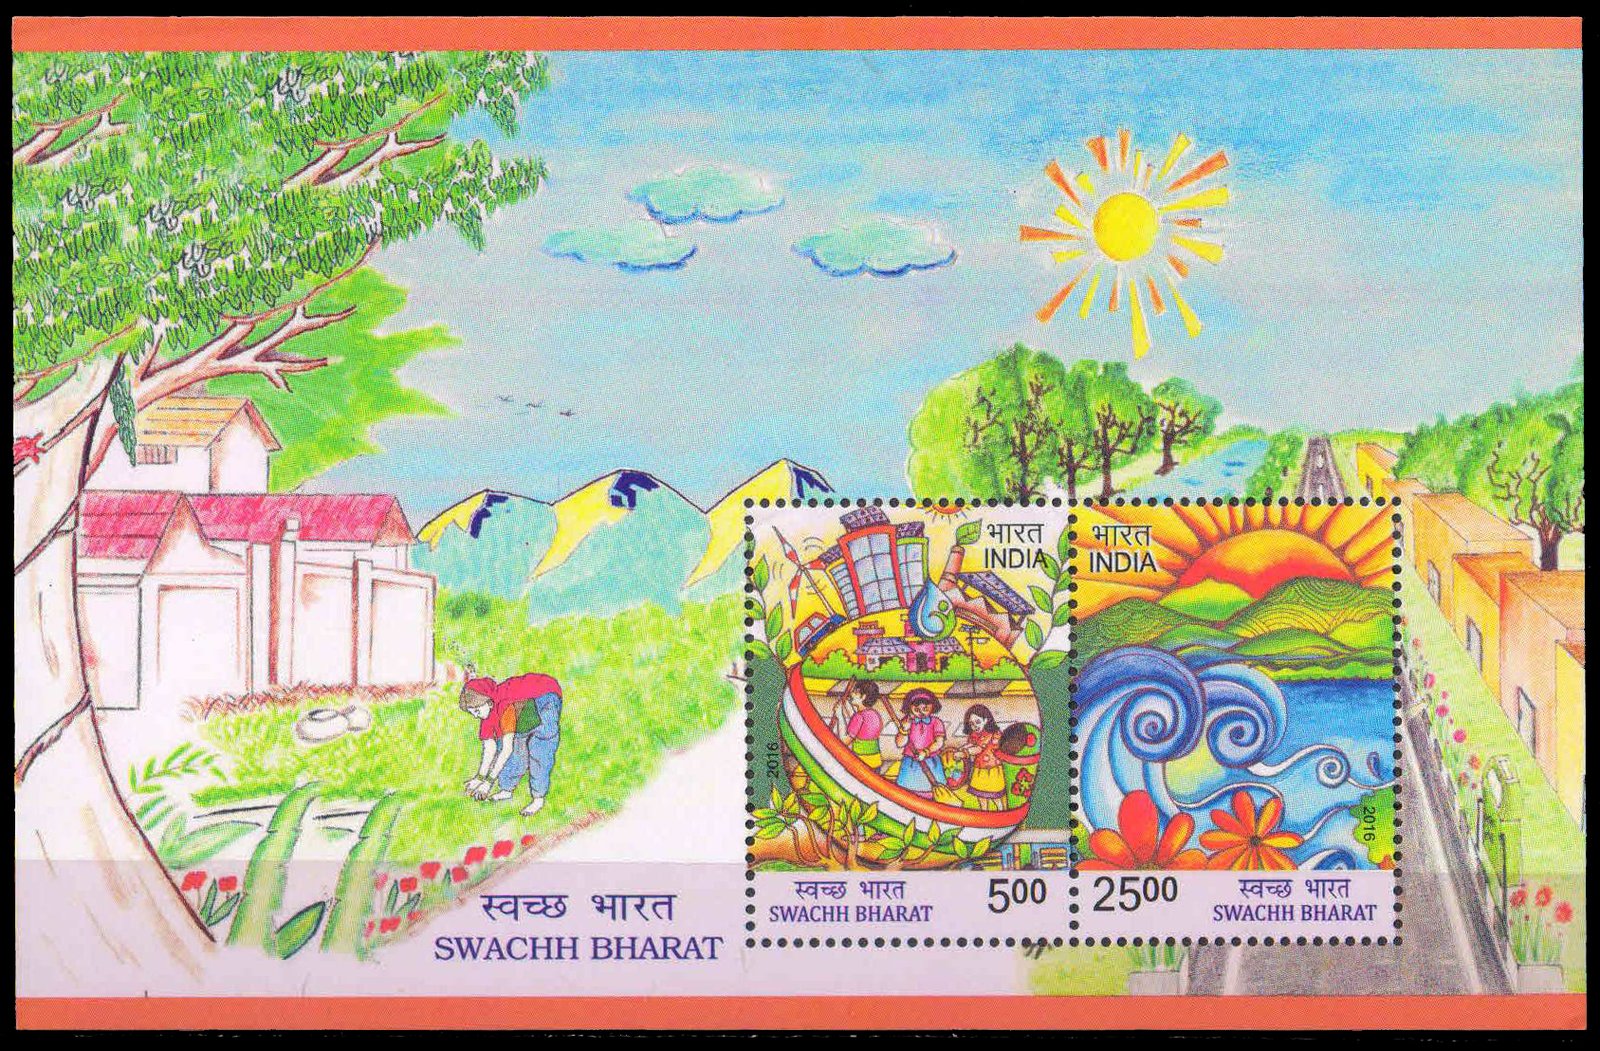 2016 - Swachh Bharat, Sheet of 2 Stamps